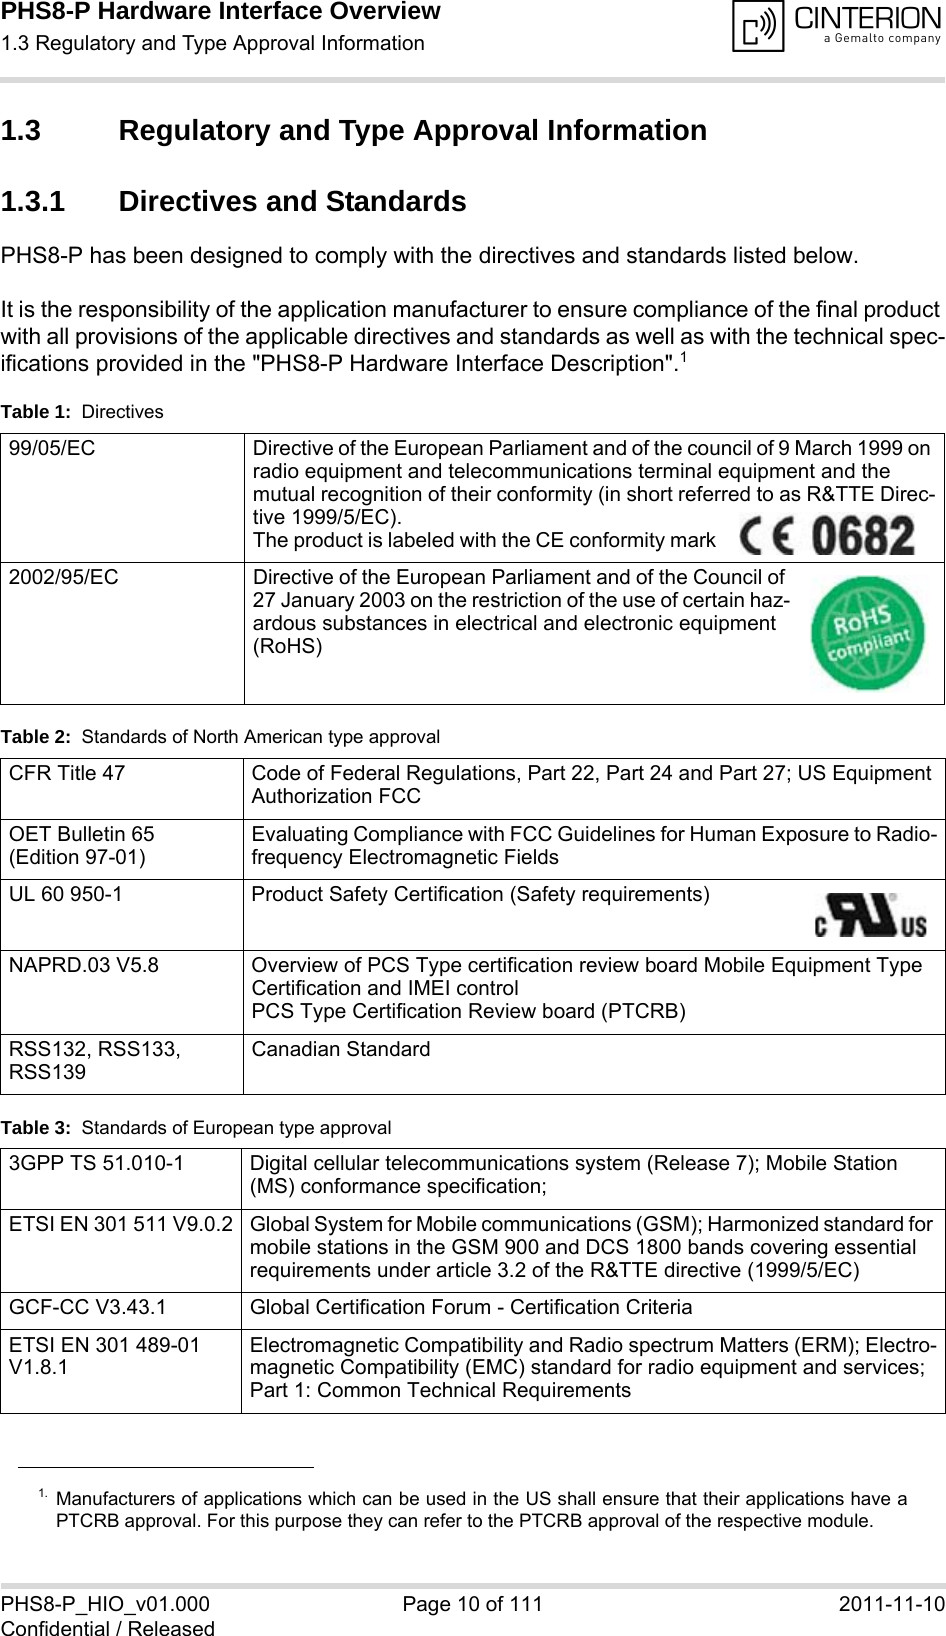 PHS8-P Hardware Interface Overview1.3 Regulatory and Type Approval Information15PHS8-P_HIO_v01.000 Page 10 of 111 2011-11-10Confidential / Released1.3 Regulatory and Type Approval Information1.3.1 Directives and StandardsPHS8-P has been designed to comply with the directives and standards listed below.It is the responsibility of the application manufacturer to ensure compliance of the final product with all provisions of the applicable directives and standards as well as with the technical spec-ifications provided in the &quot;PHS8-P Hardware Interface Description&quot;.11. Manufacturers of applications which can be used in the US shall ensure that their applications have aPTCRB approval. For this purpose they can refer to the PTCRB approval of the respective module. Table 1:  Directives99/05/EC Directive of the European Parliament and of the council of 9 March 1999 on radio equipment and telecommunications terminal equipment and the mutual recognition of their conformity (in short referred to as R&amp;TTE Direc-tive 1999/5/EC).The product is labeled with the CE conformity mark   2002/95/EC  Directive of the European Parliament and of the Council of 27 January 2003 on the restriction of the use of certain haz-ardous substances in electrical and electronic equipment (RoHS)Table 2:  Standards of North American type approvalCFR Title 47 Code of Federal Regulations, Part 22, Part 24 and Part 27; US Equipment Authorization FCCOET Bulletin 65(Edition 97-01)Evaluating Compliance with FCC Guidelines for Human Exposure to Radio-frequency Electromagnetic FieldsUL 60 950-1 Product Safety Certification (Safety requirements) NAPRD.03 V5.8 Overview of PCS Type certification review board Mobile Equipment Type Certification and IMEI controlPCS Type Certification Review board (PTCRB)RSS132, RSS133, RSS139Canadian StandardTable 3:  Standards of European type approval3GPP TS 51.010-1 Digital cellular telecommunications system (Release 7); Mobile Station (MS) conformance specification;ETSI EN 301 511 V9.0.2 Global System for Mobile communications (GSM); Harmonized standard for mobile stations in the GSM 900 and DCS 1800 bands covering essential requirements under article 3.2 of the R&amp;TTE directive (1999/5/EC)GCF-CC V3.43.1  Global Certification Forum - Certification CriteriaETSI EN 301 489-01 V1.8.1Electromagnetic Compatibility and Radio spectrum Matters (ERM); Electro-magnetic Compatibility (EMC) standard for radio equipment and services; Part 1: Common Technical Requirements